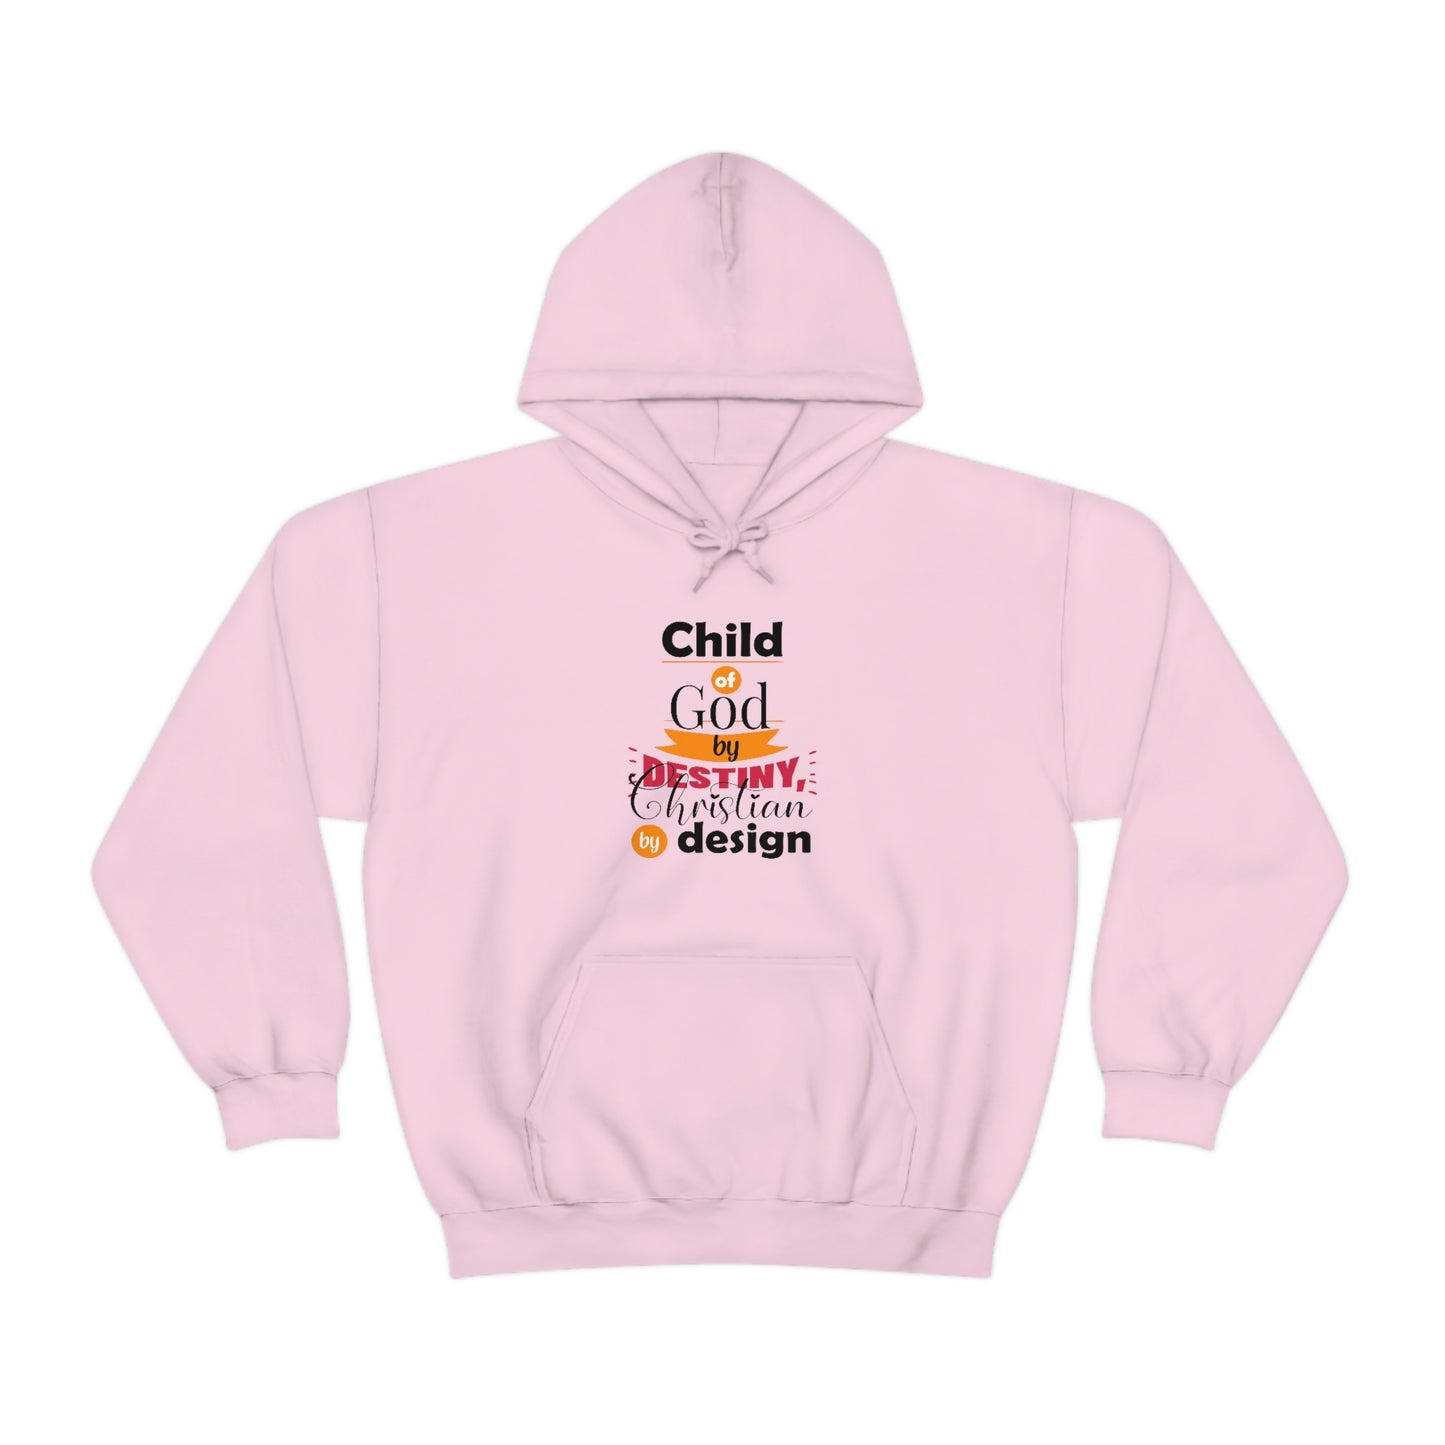 Child Of God By Destiny Christian By Design Unisex Pull On Hooded sweatshirt